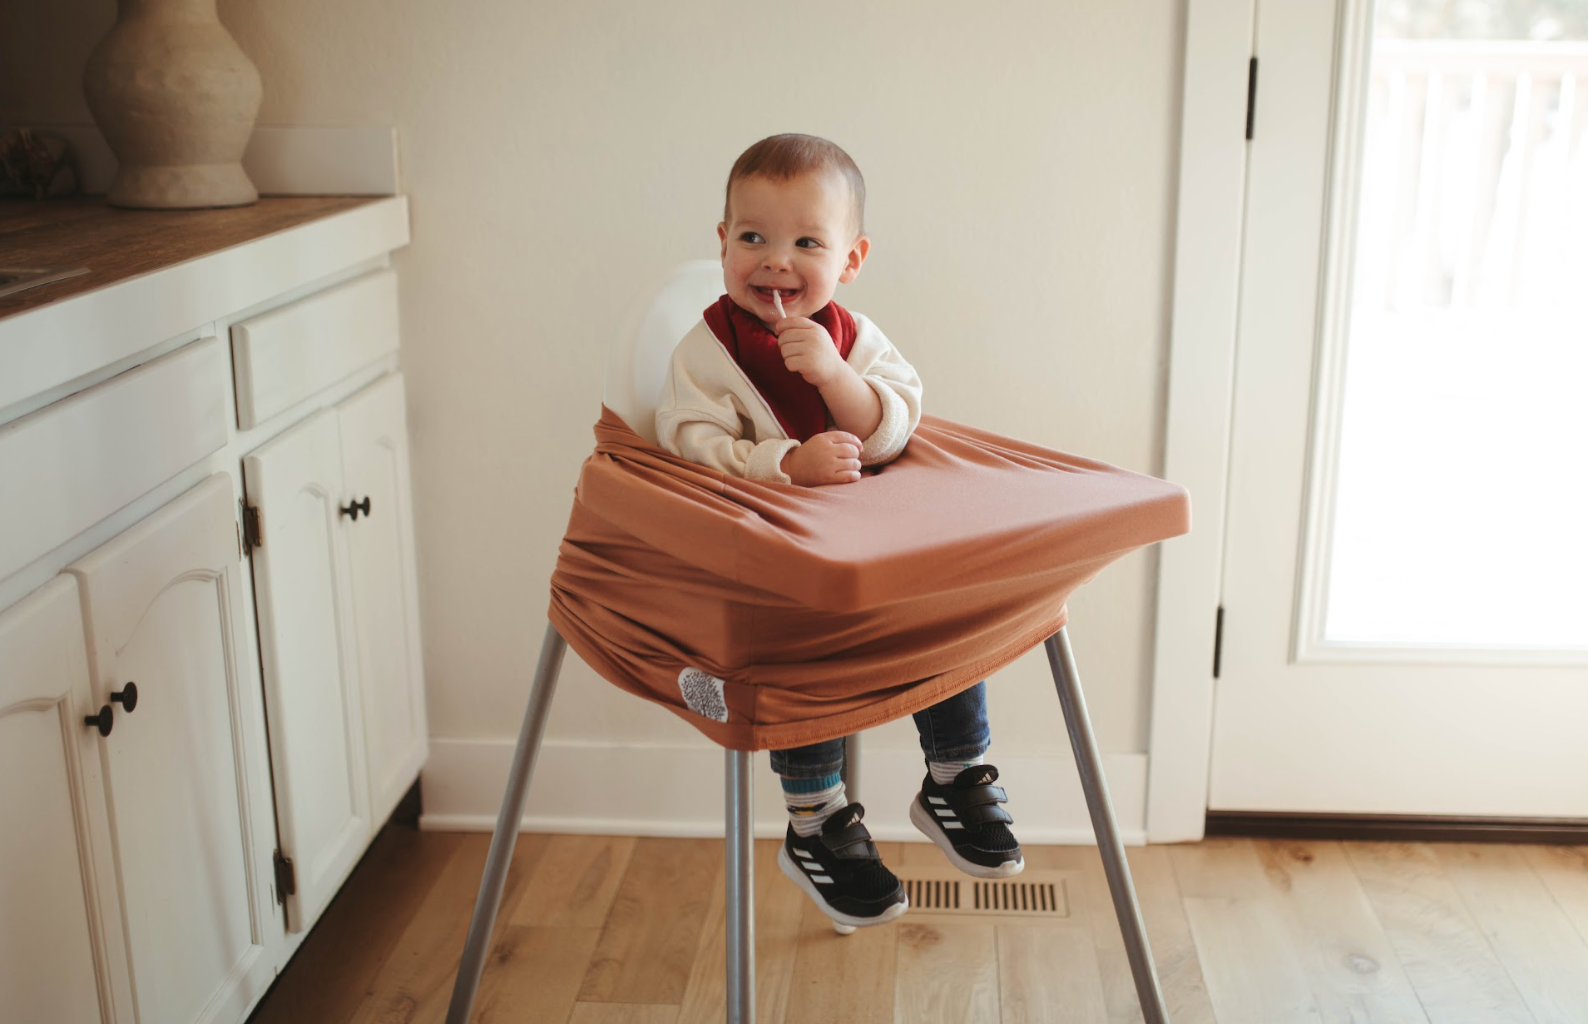 Baby Sitting in High Chair with High Chair Cover